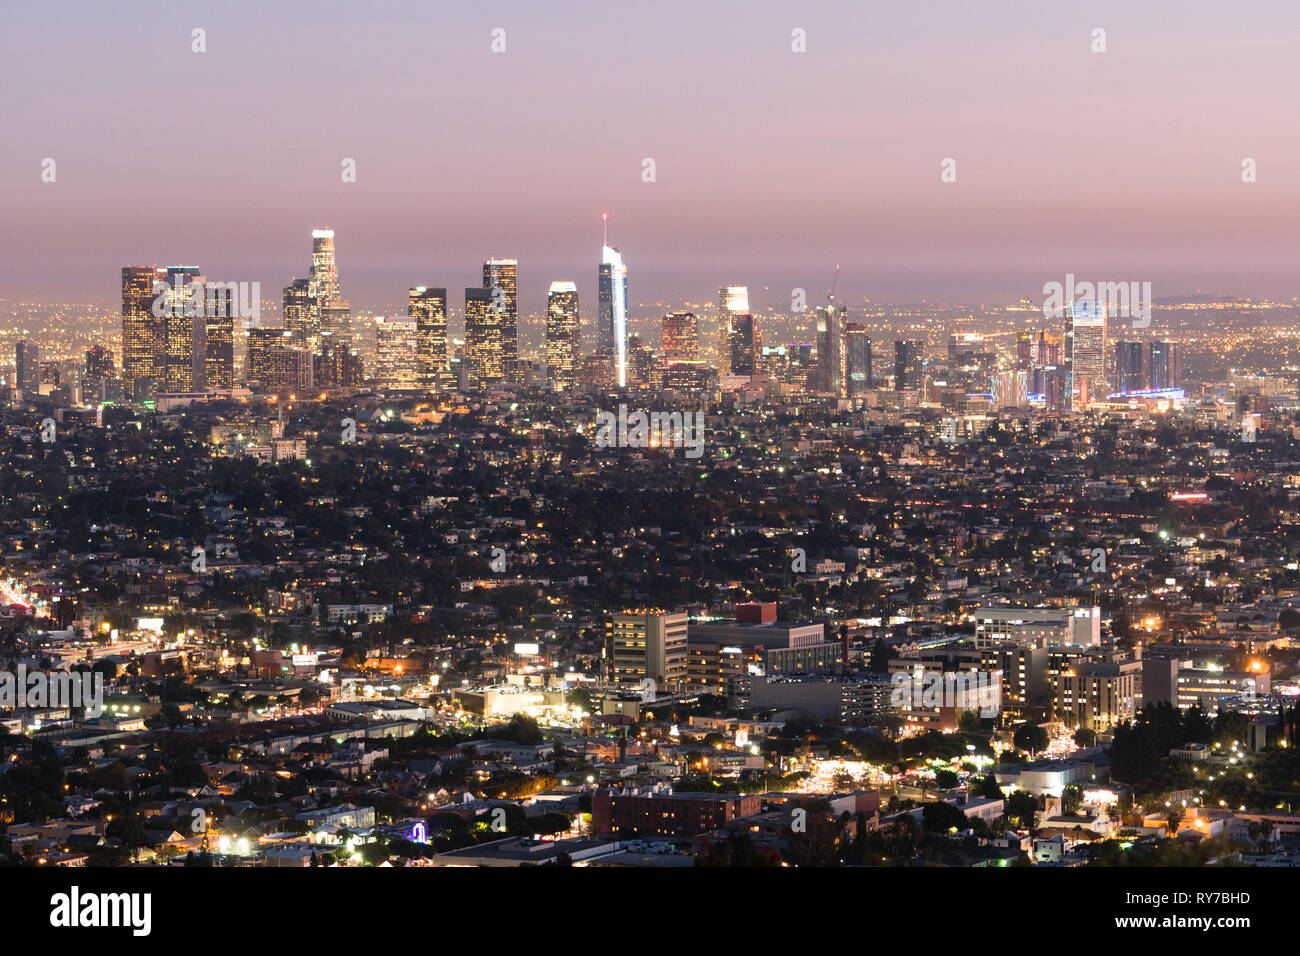 The downtown city skyline of Los Angeles at night Stock Photo